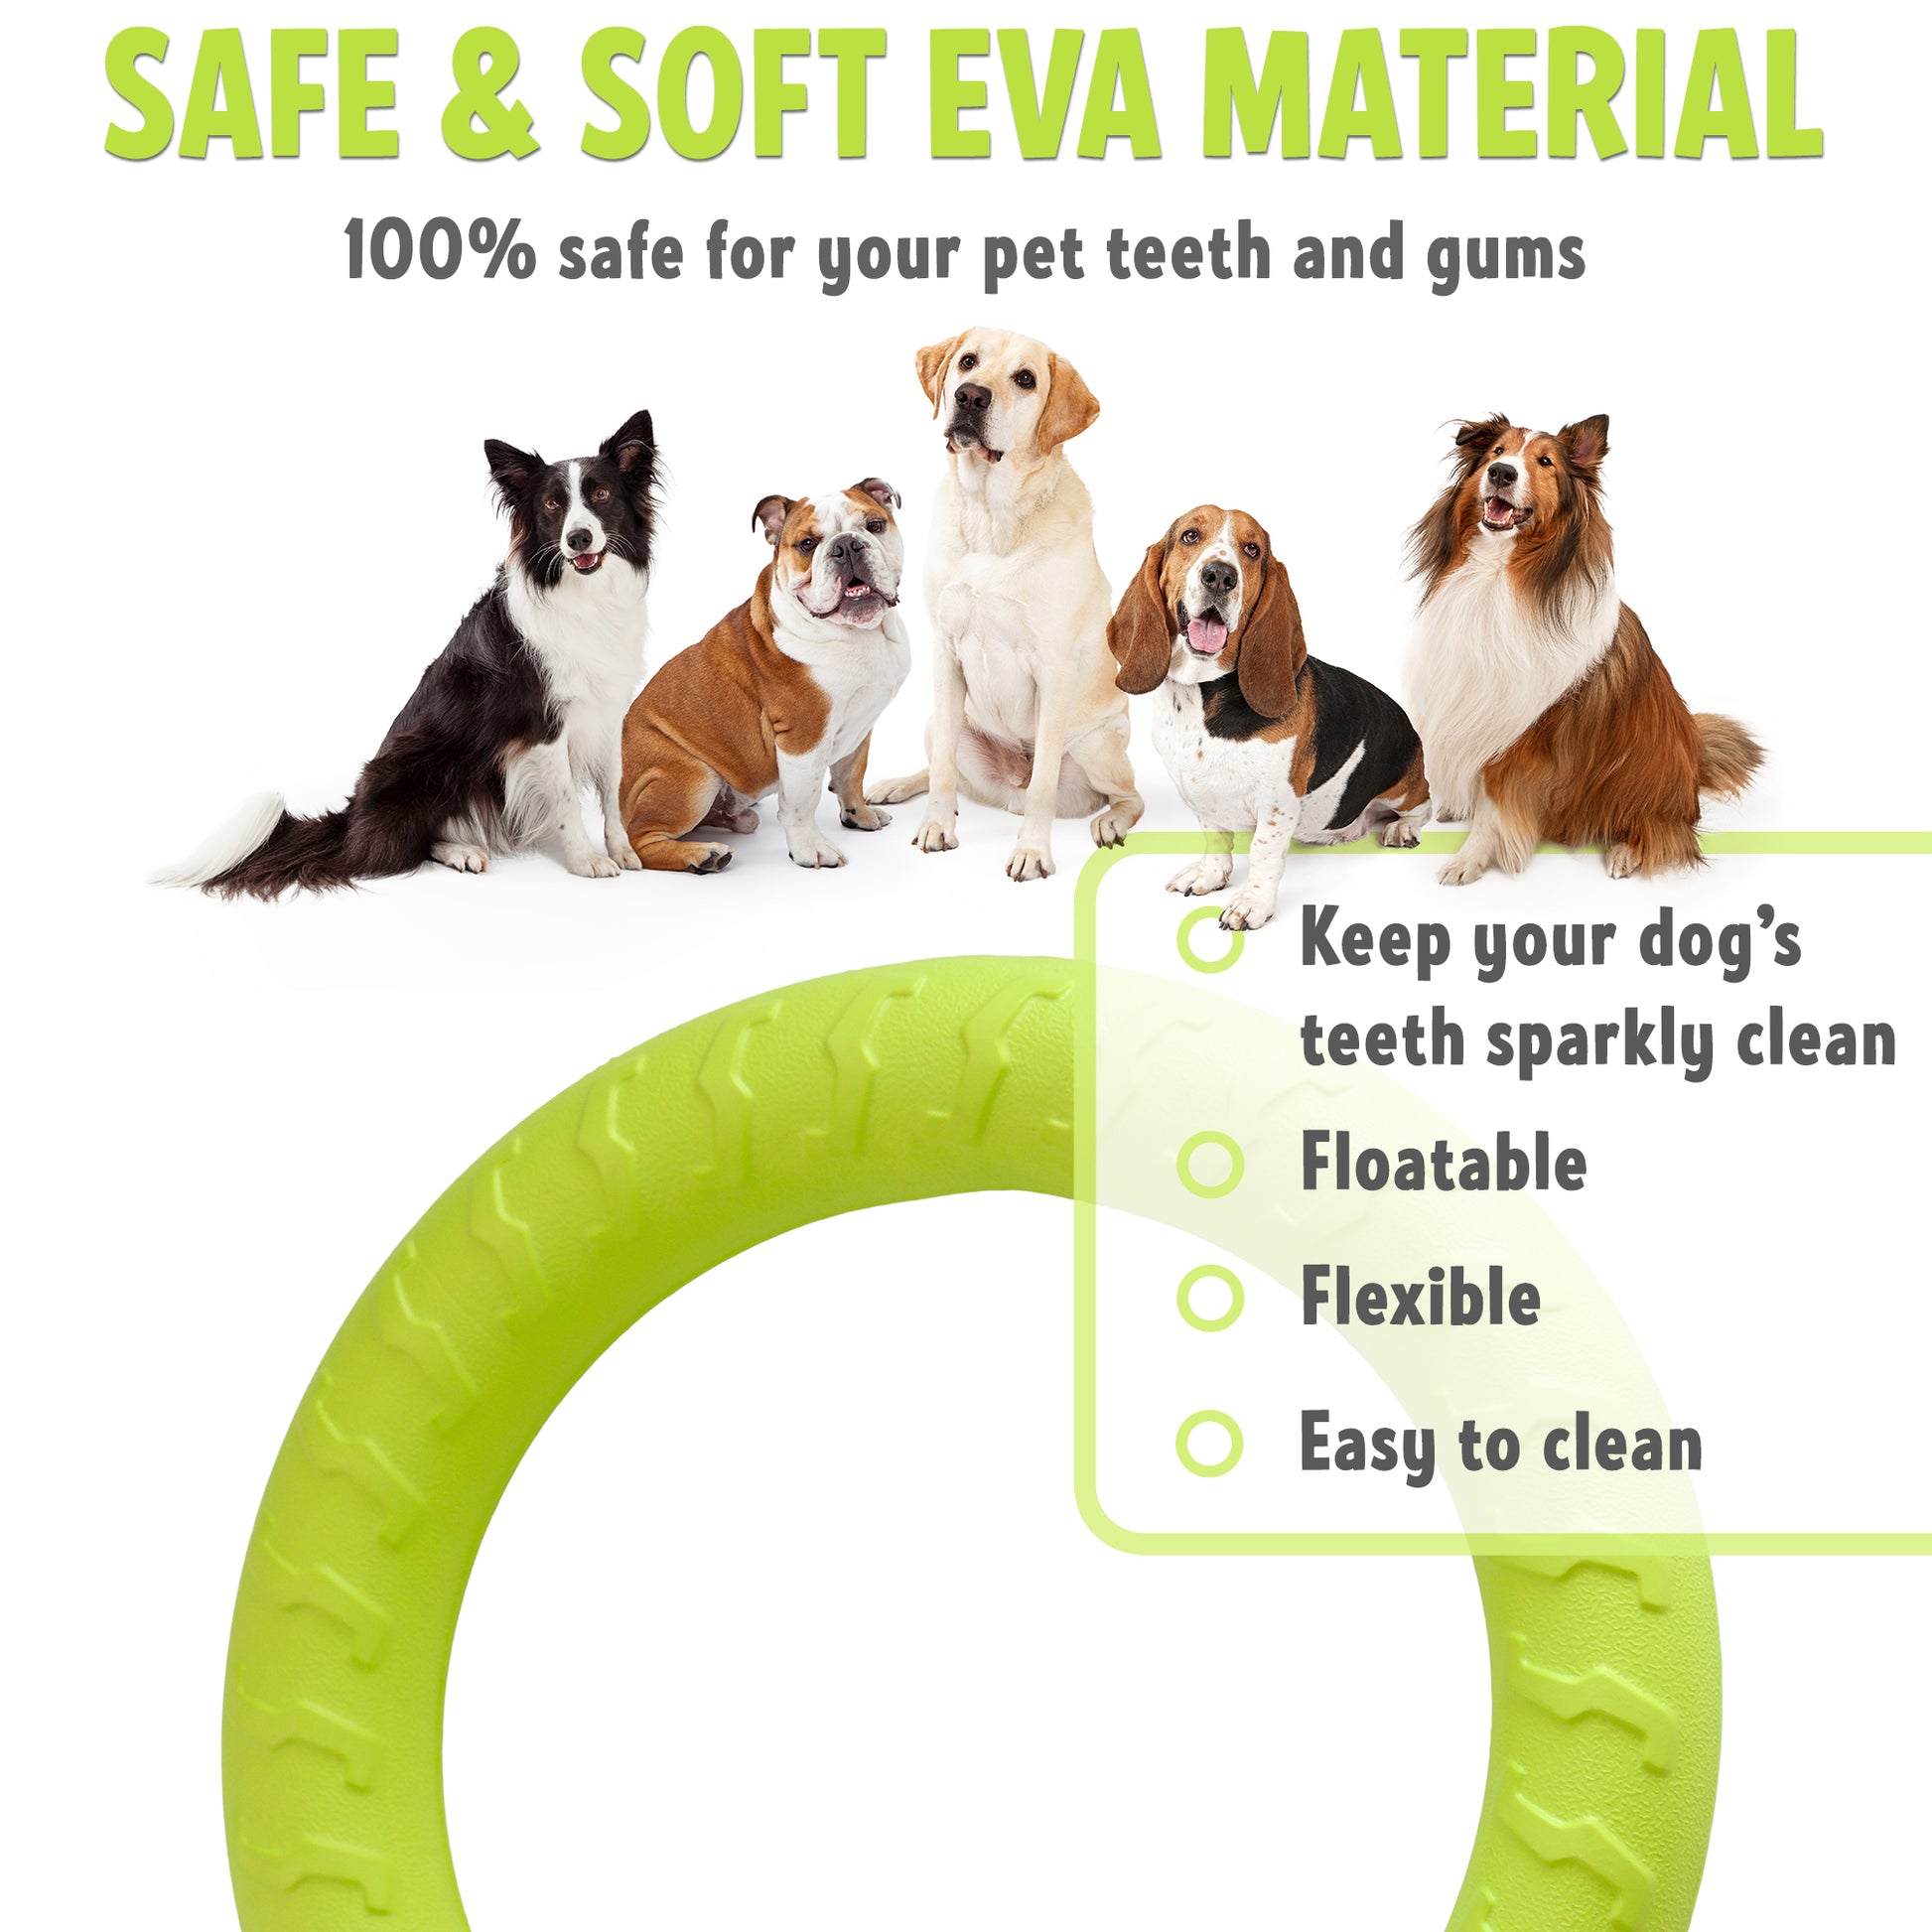 safe and soft eva material_100% safe for your pet teeth and gums